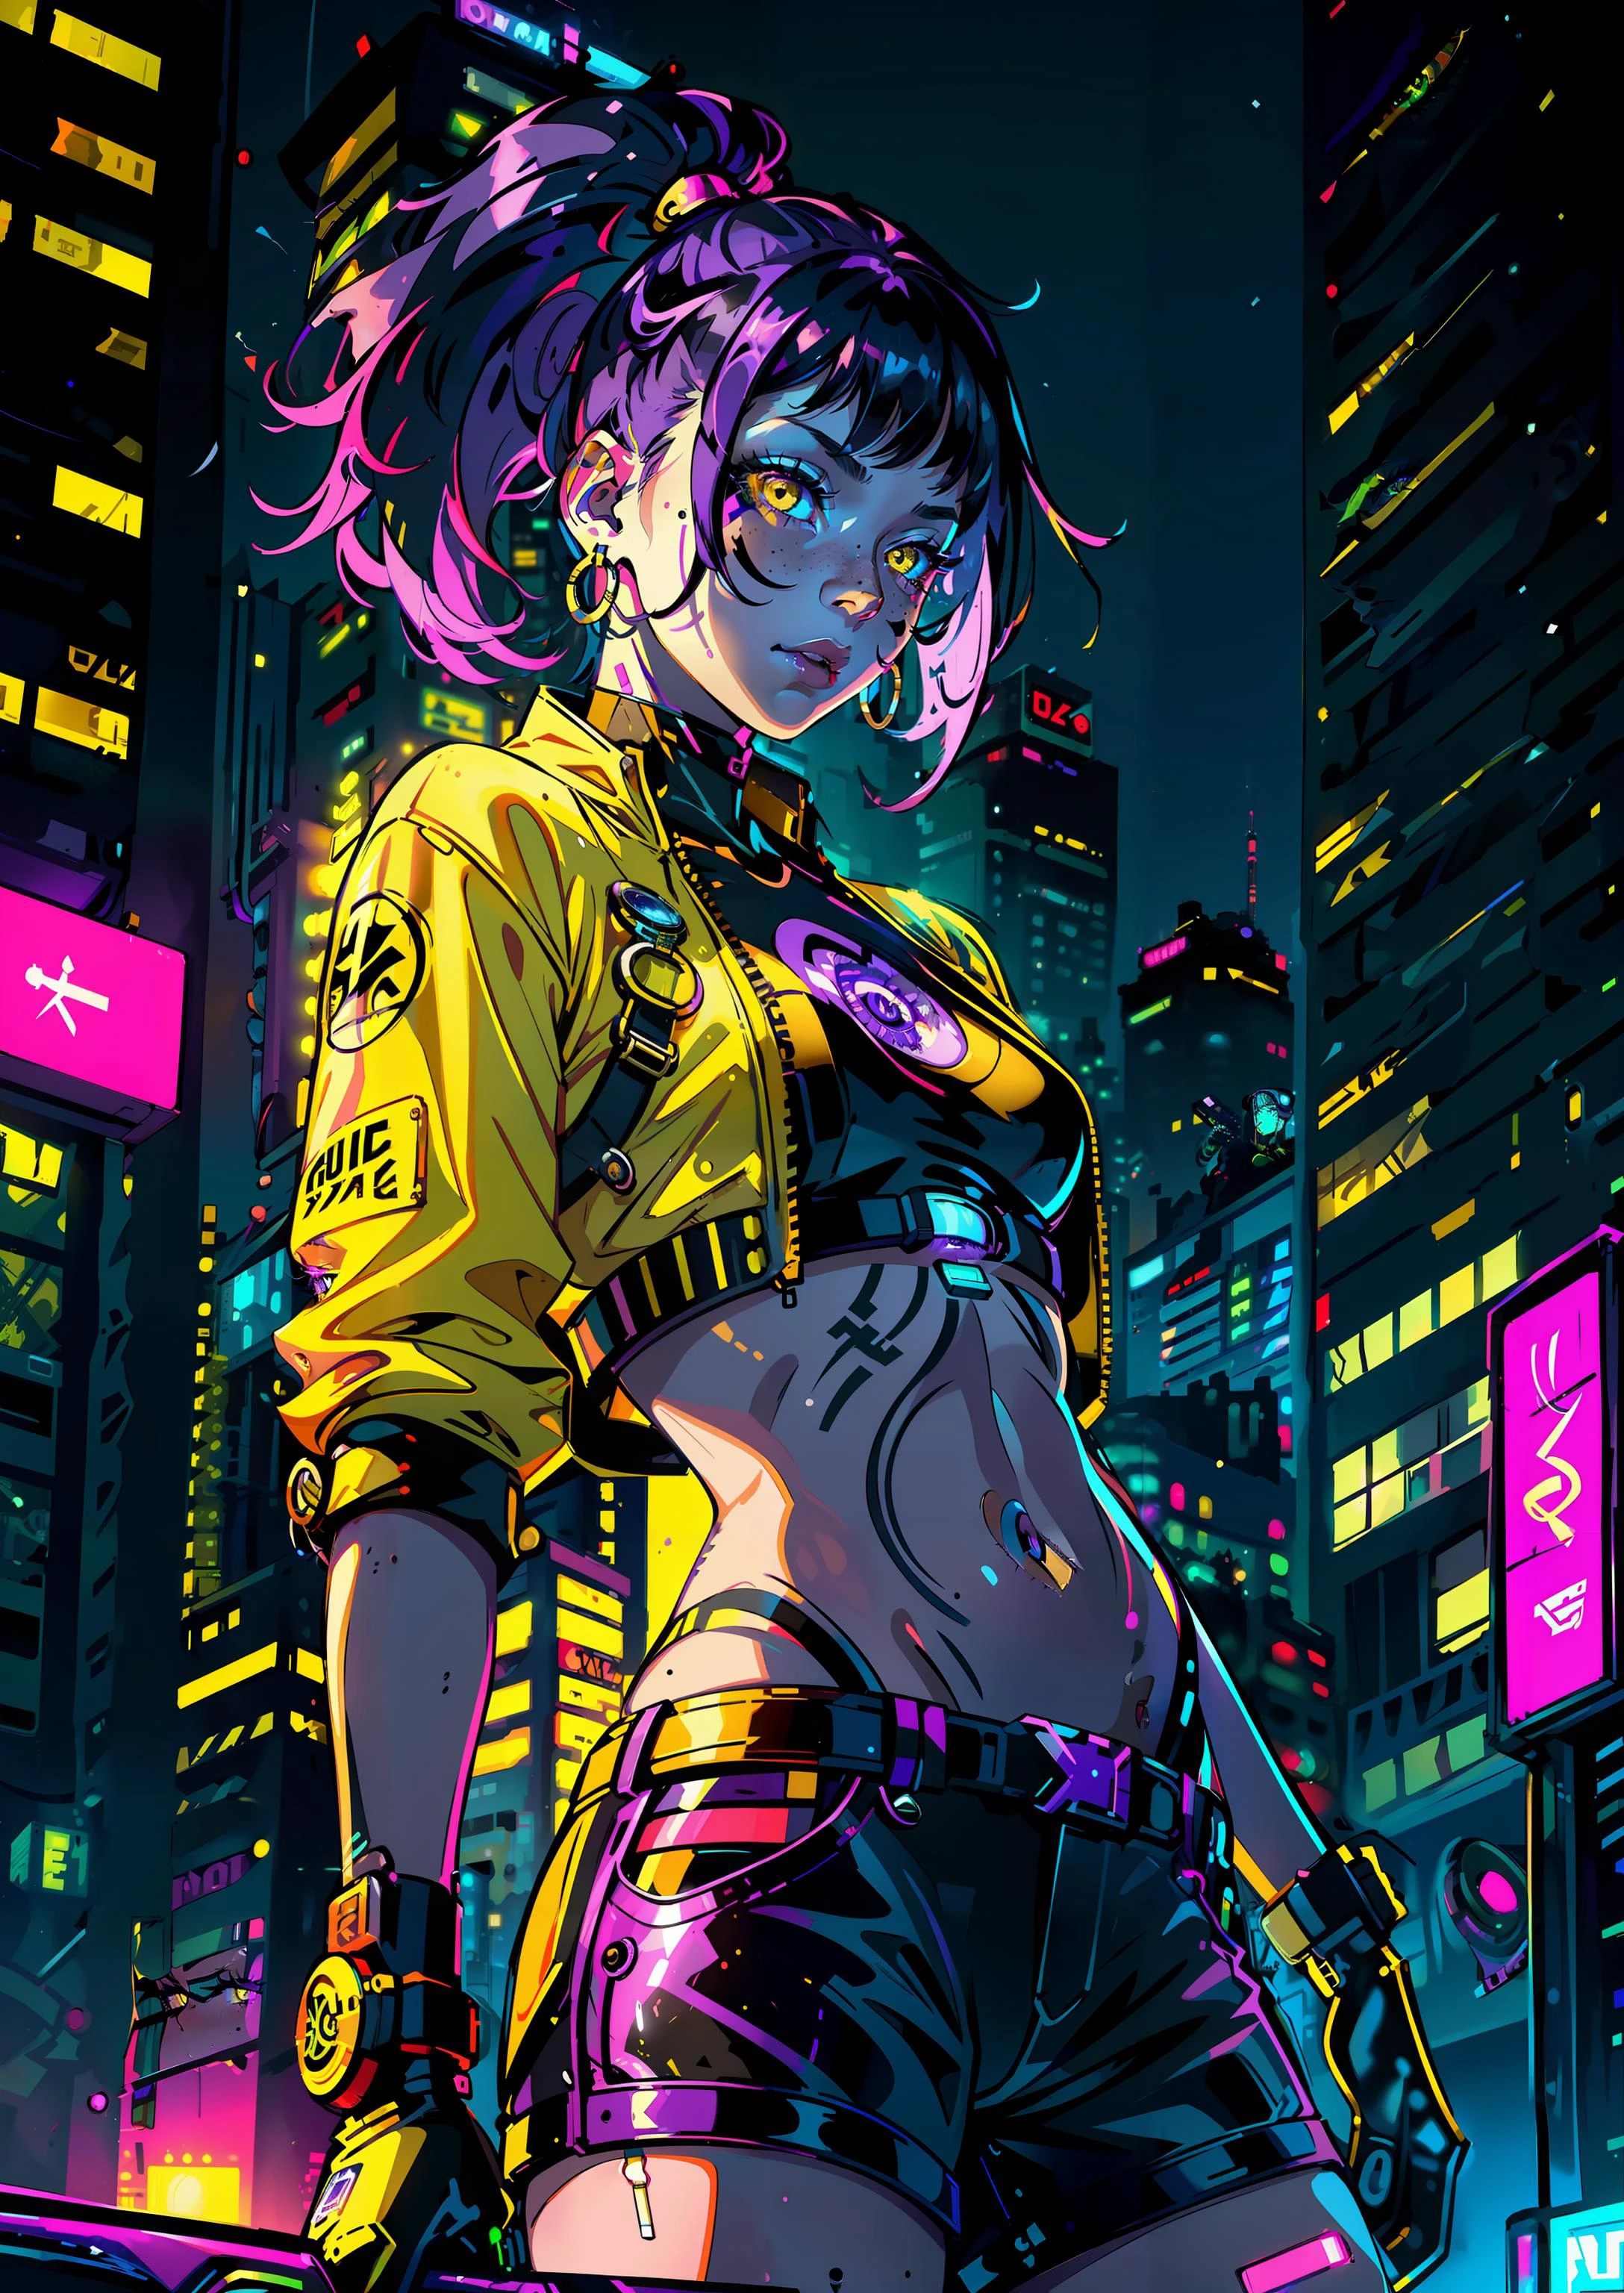 1girl,solo,colorful,yellow eyes,cyberpunk,city,peace sign,earrings,purple hair,eye patche,freckles,prothesis,mechanic,neon,beautiful lighting,purple reflection,cap,smoking,character focus,cg illustration,bust shot,yellow and black outfit,black hair,